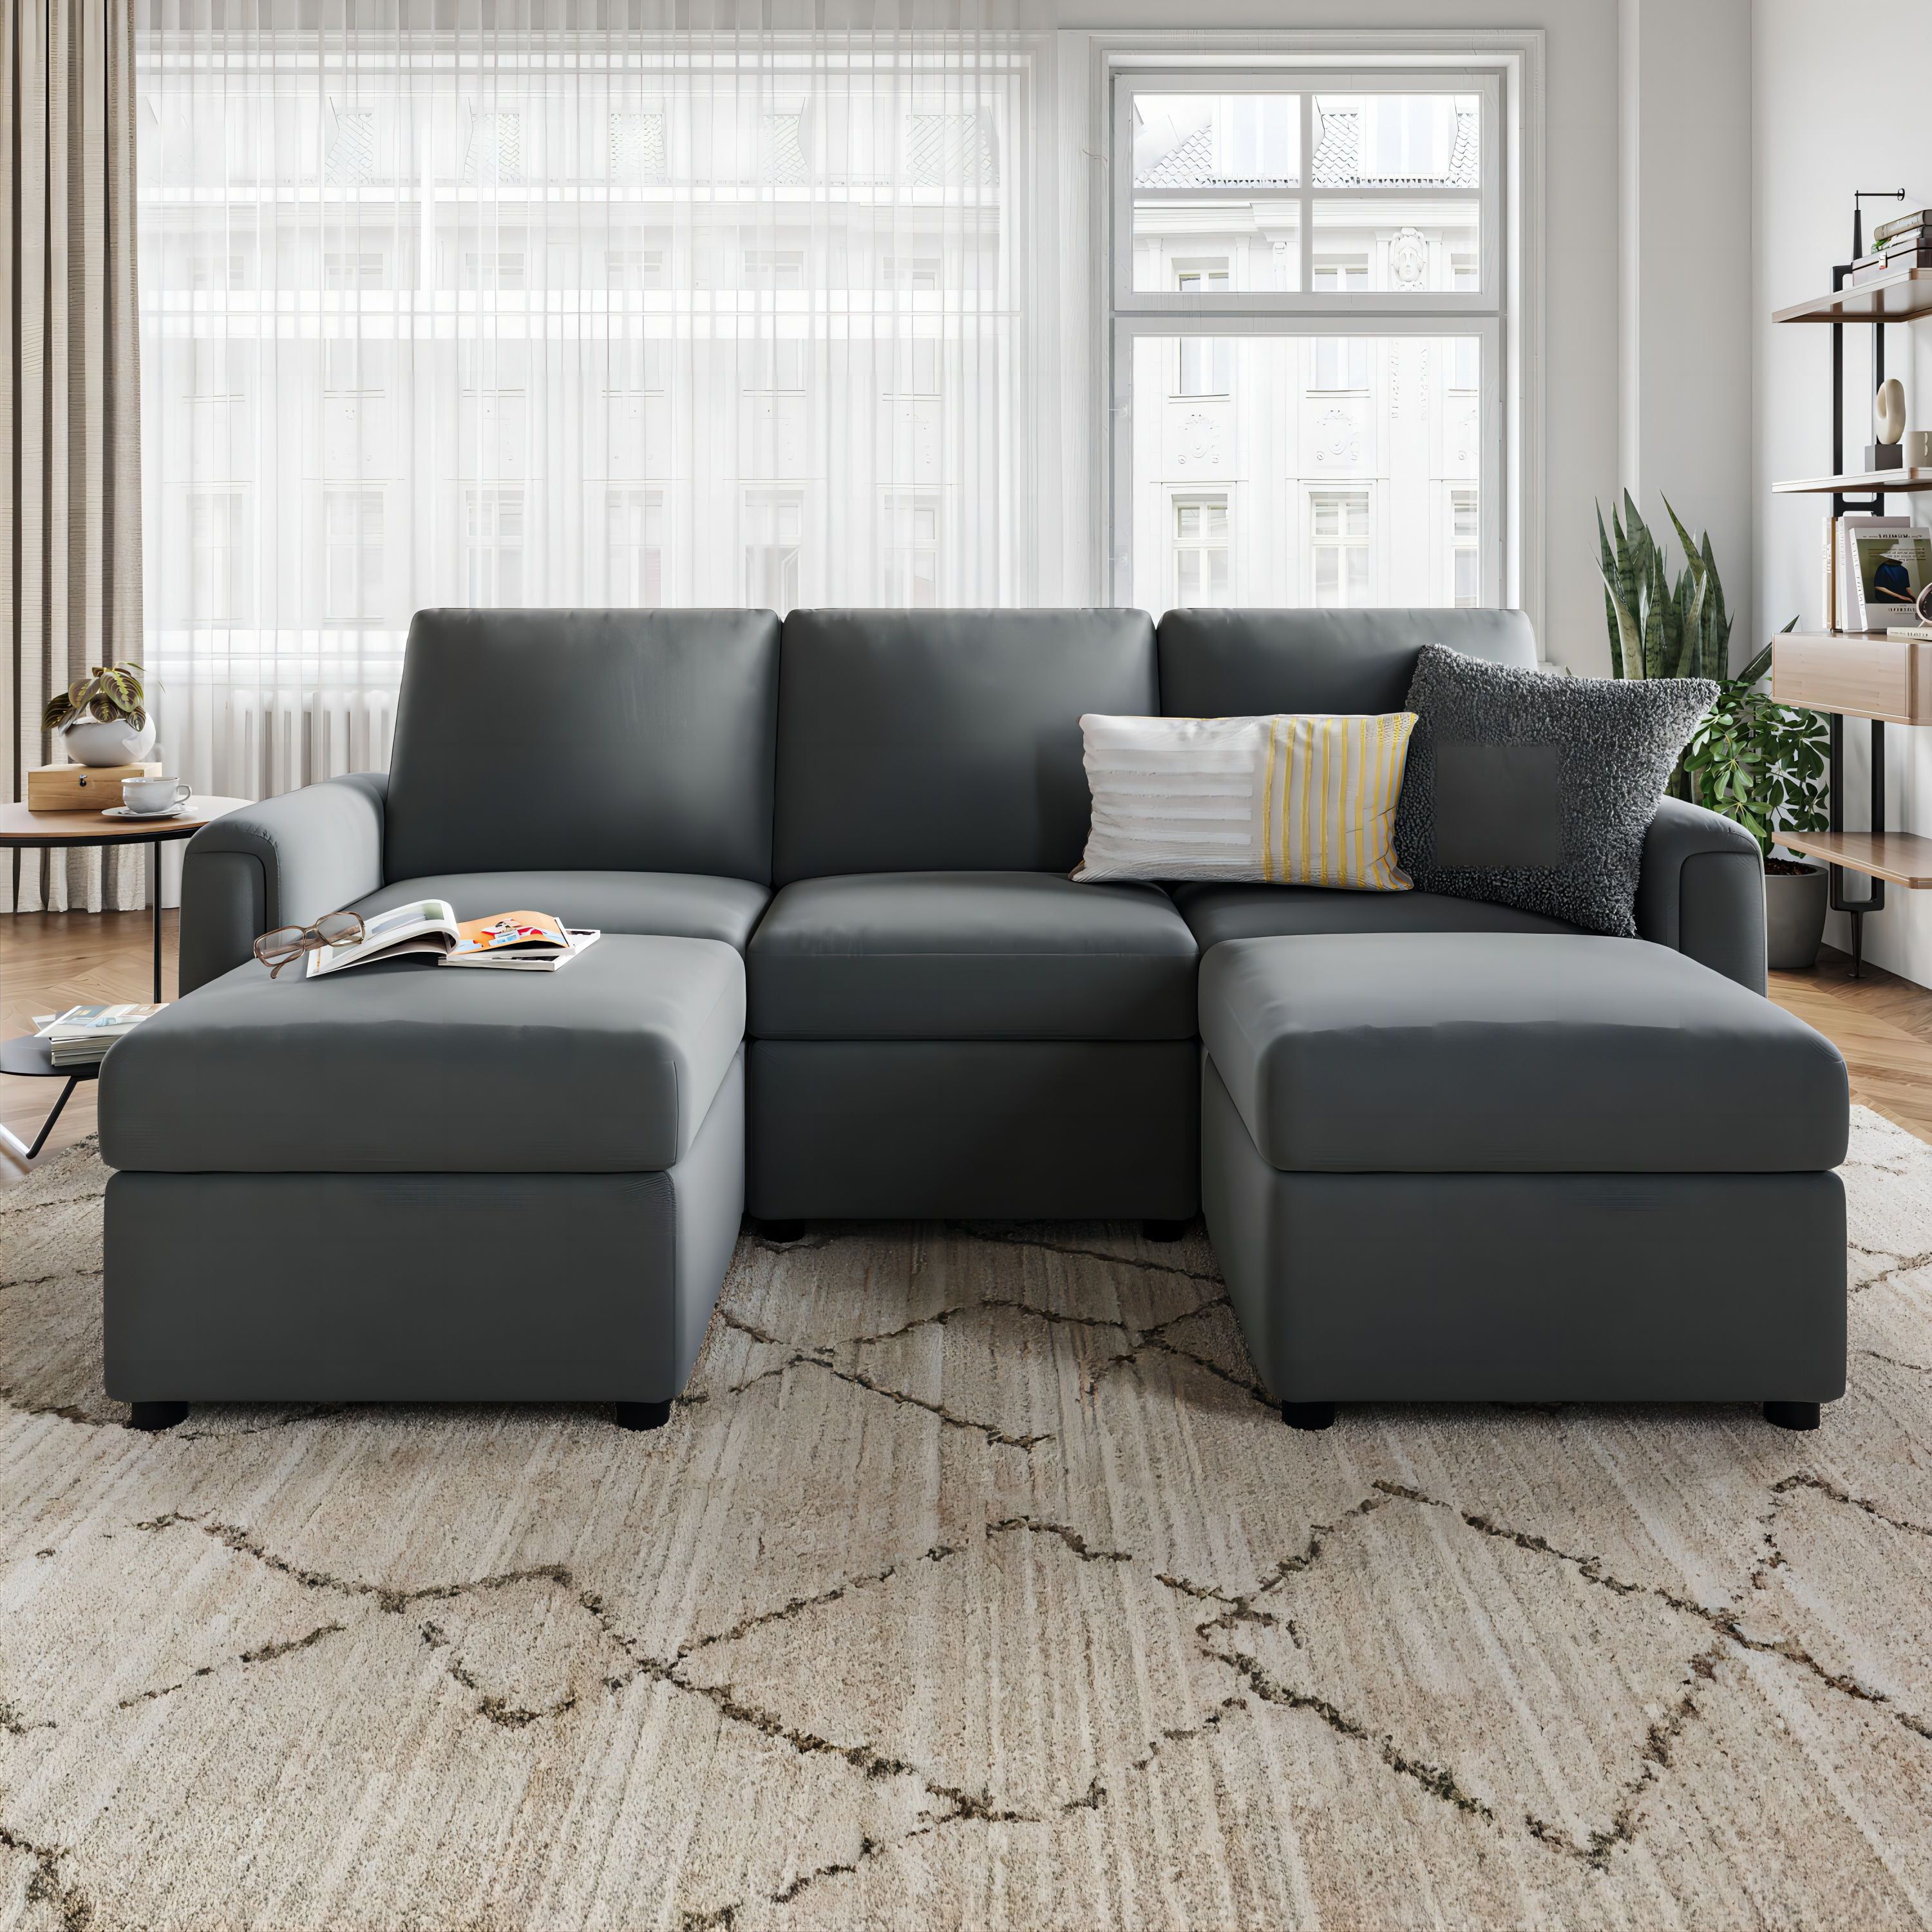 Linsy Home Modular Couches And Sofas Sectional With Storage Sectional Sofa  U Shaped Sectional Couch With Reversible Chaises, Dark Gray – Walmart Pertaining To Sectional Couches With Reversible Chaises (View 9 of 20)